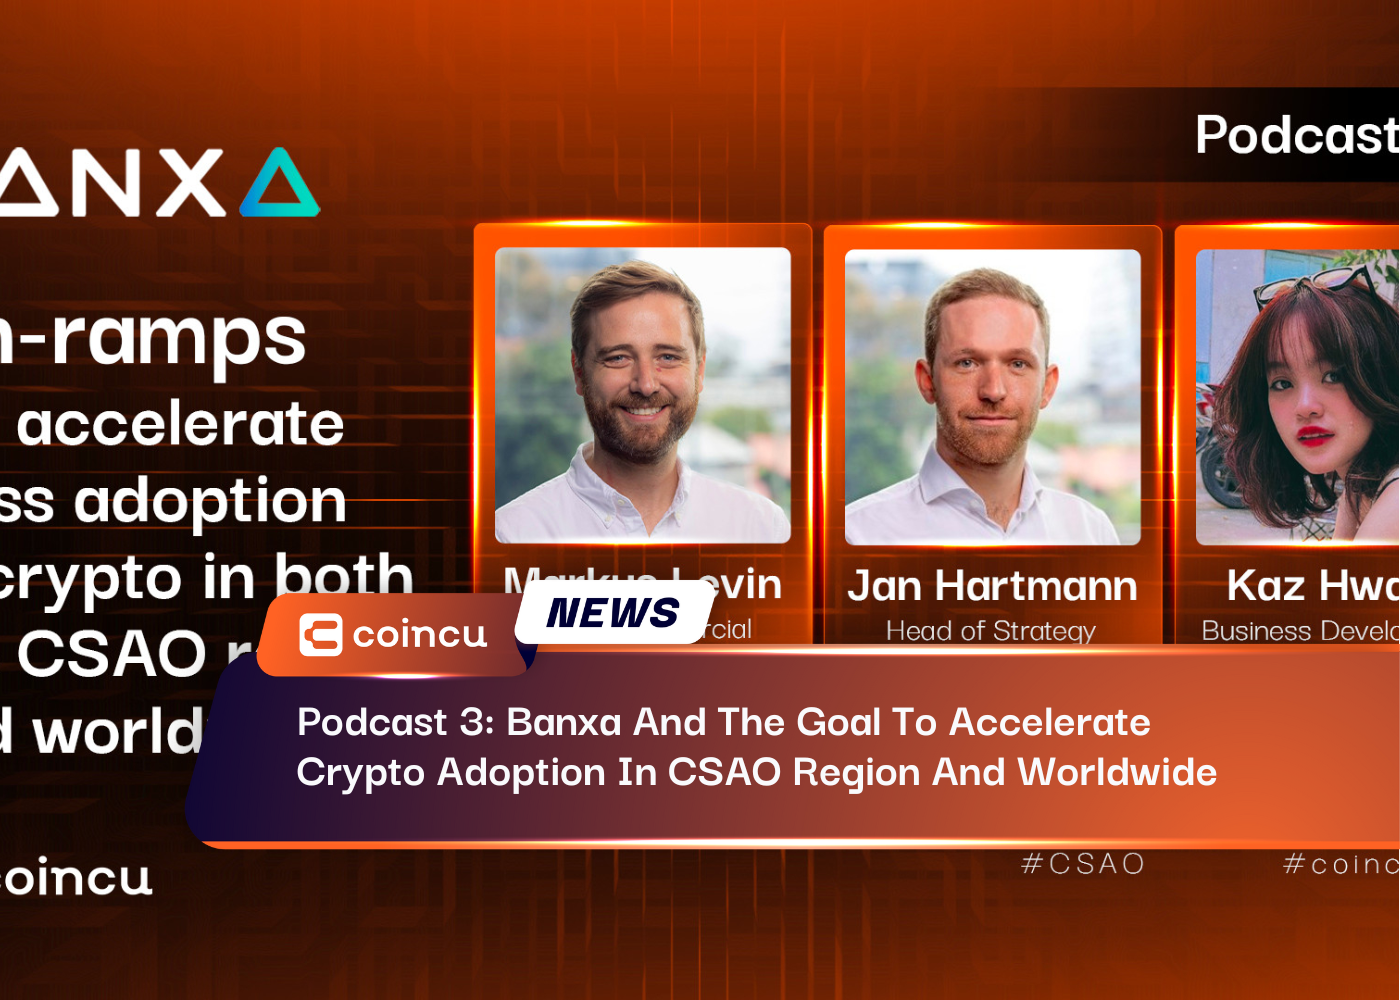 Podcast 3: Banxa And The Goal To Accelerate Crypto Adoption In CSAO Region And Worldwide